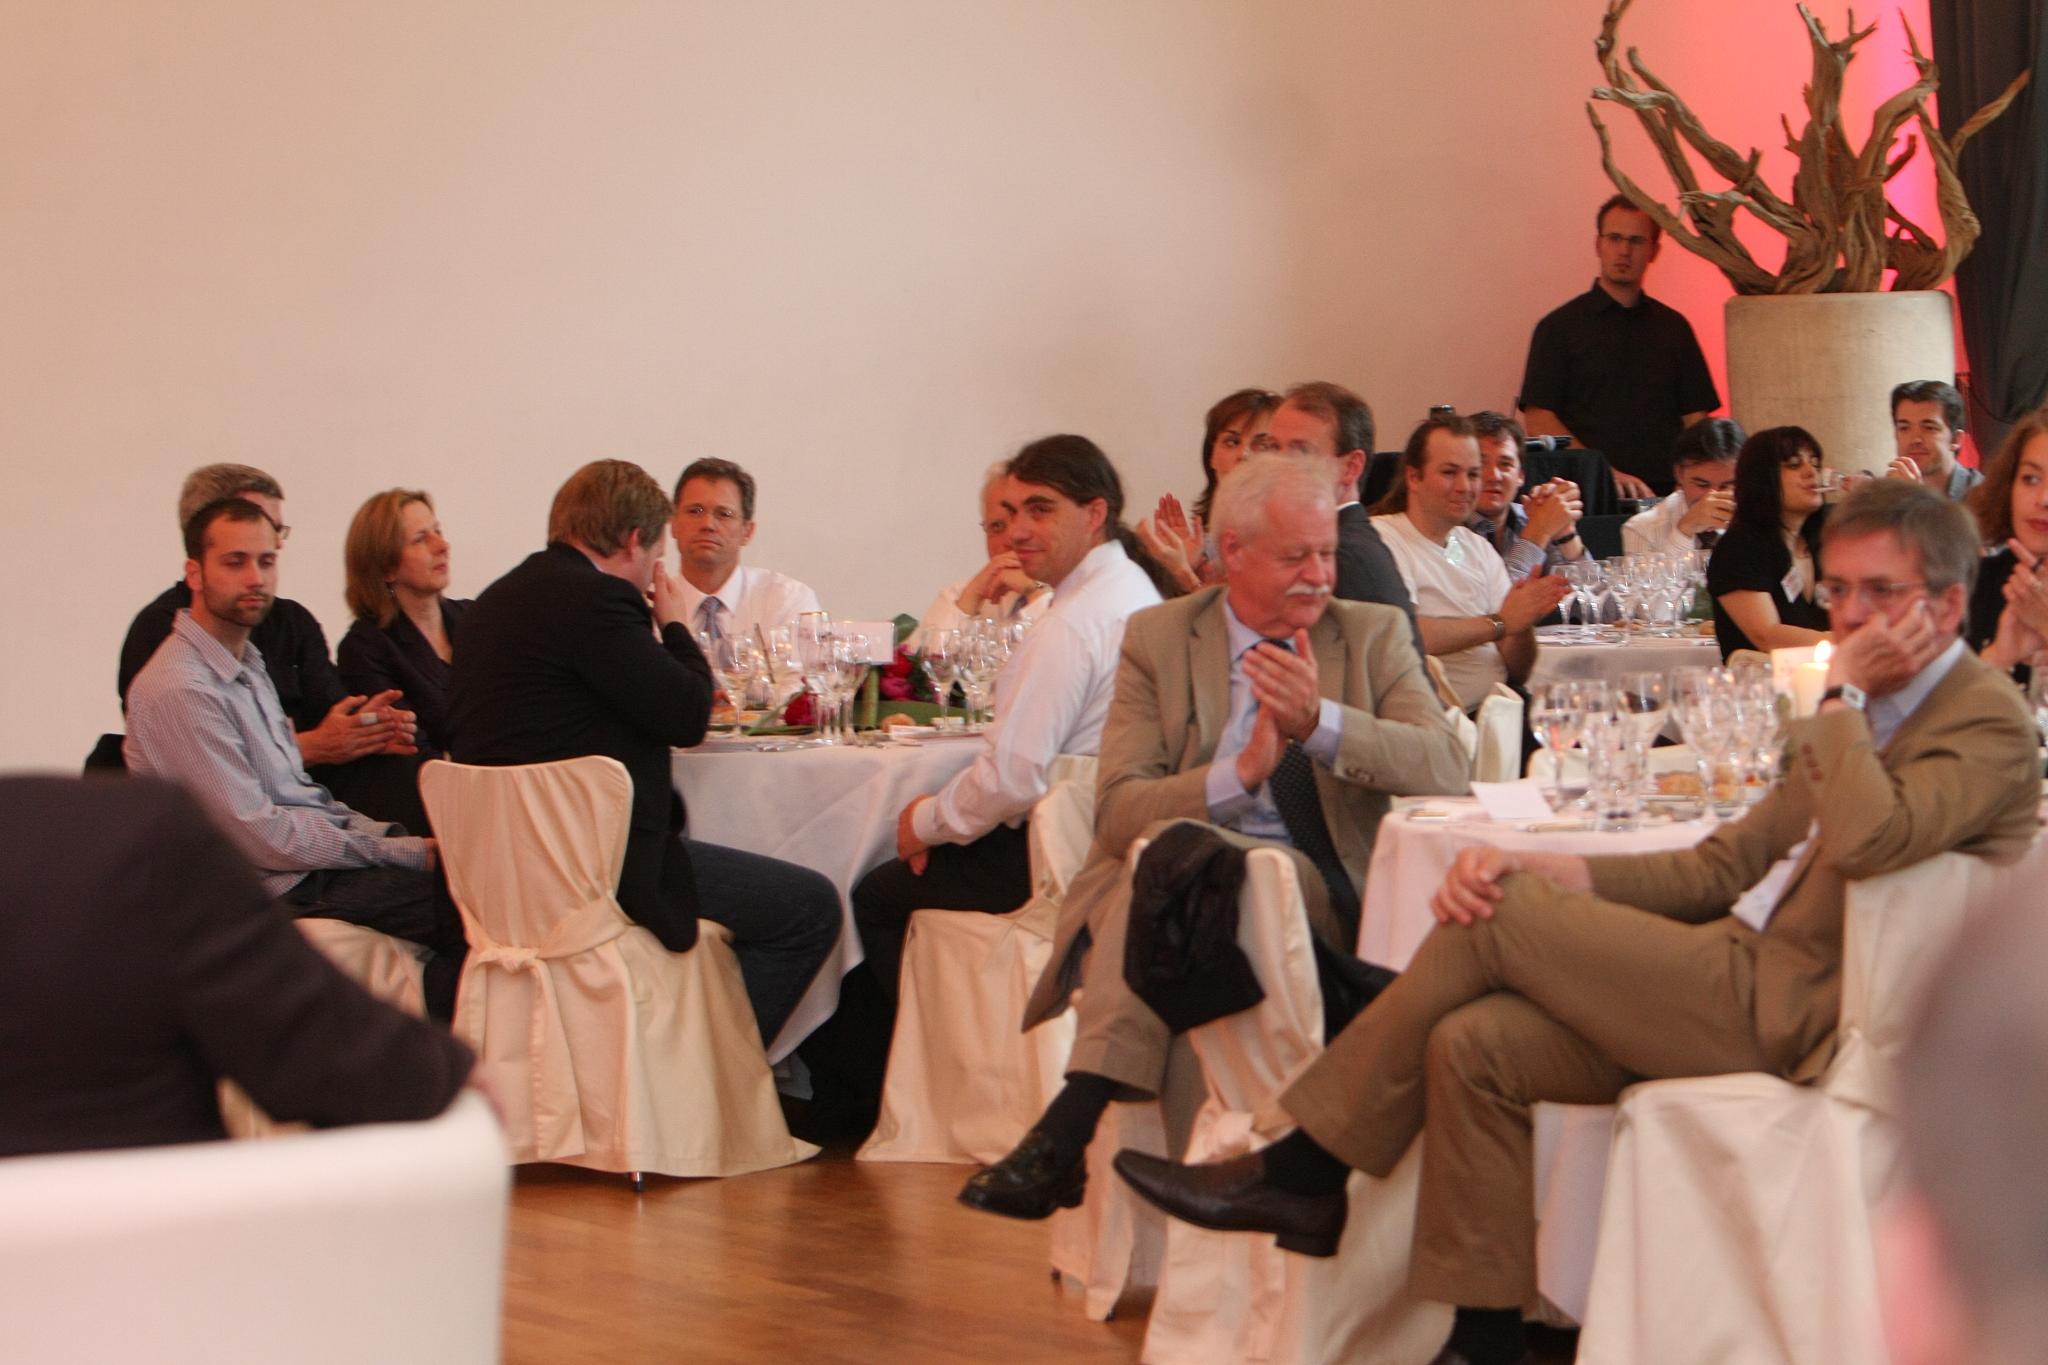 people are enjoying a business dinner at a party